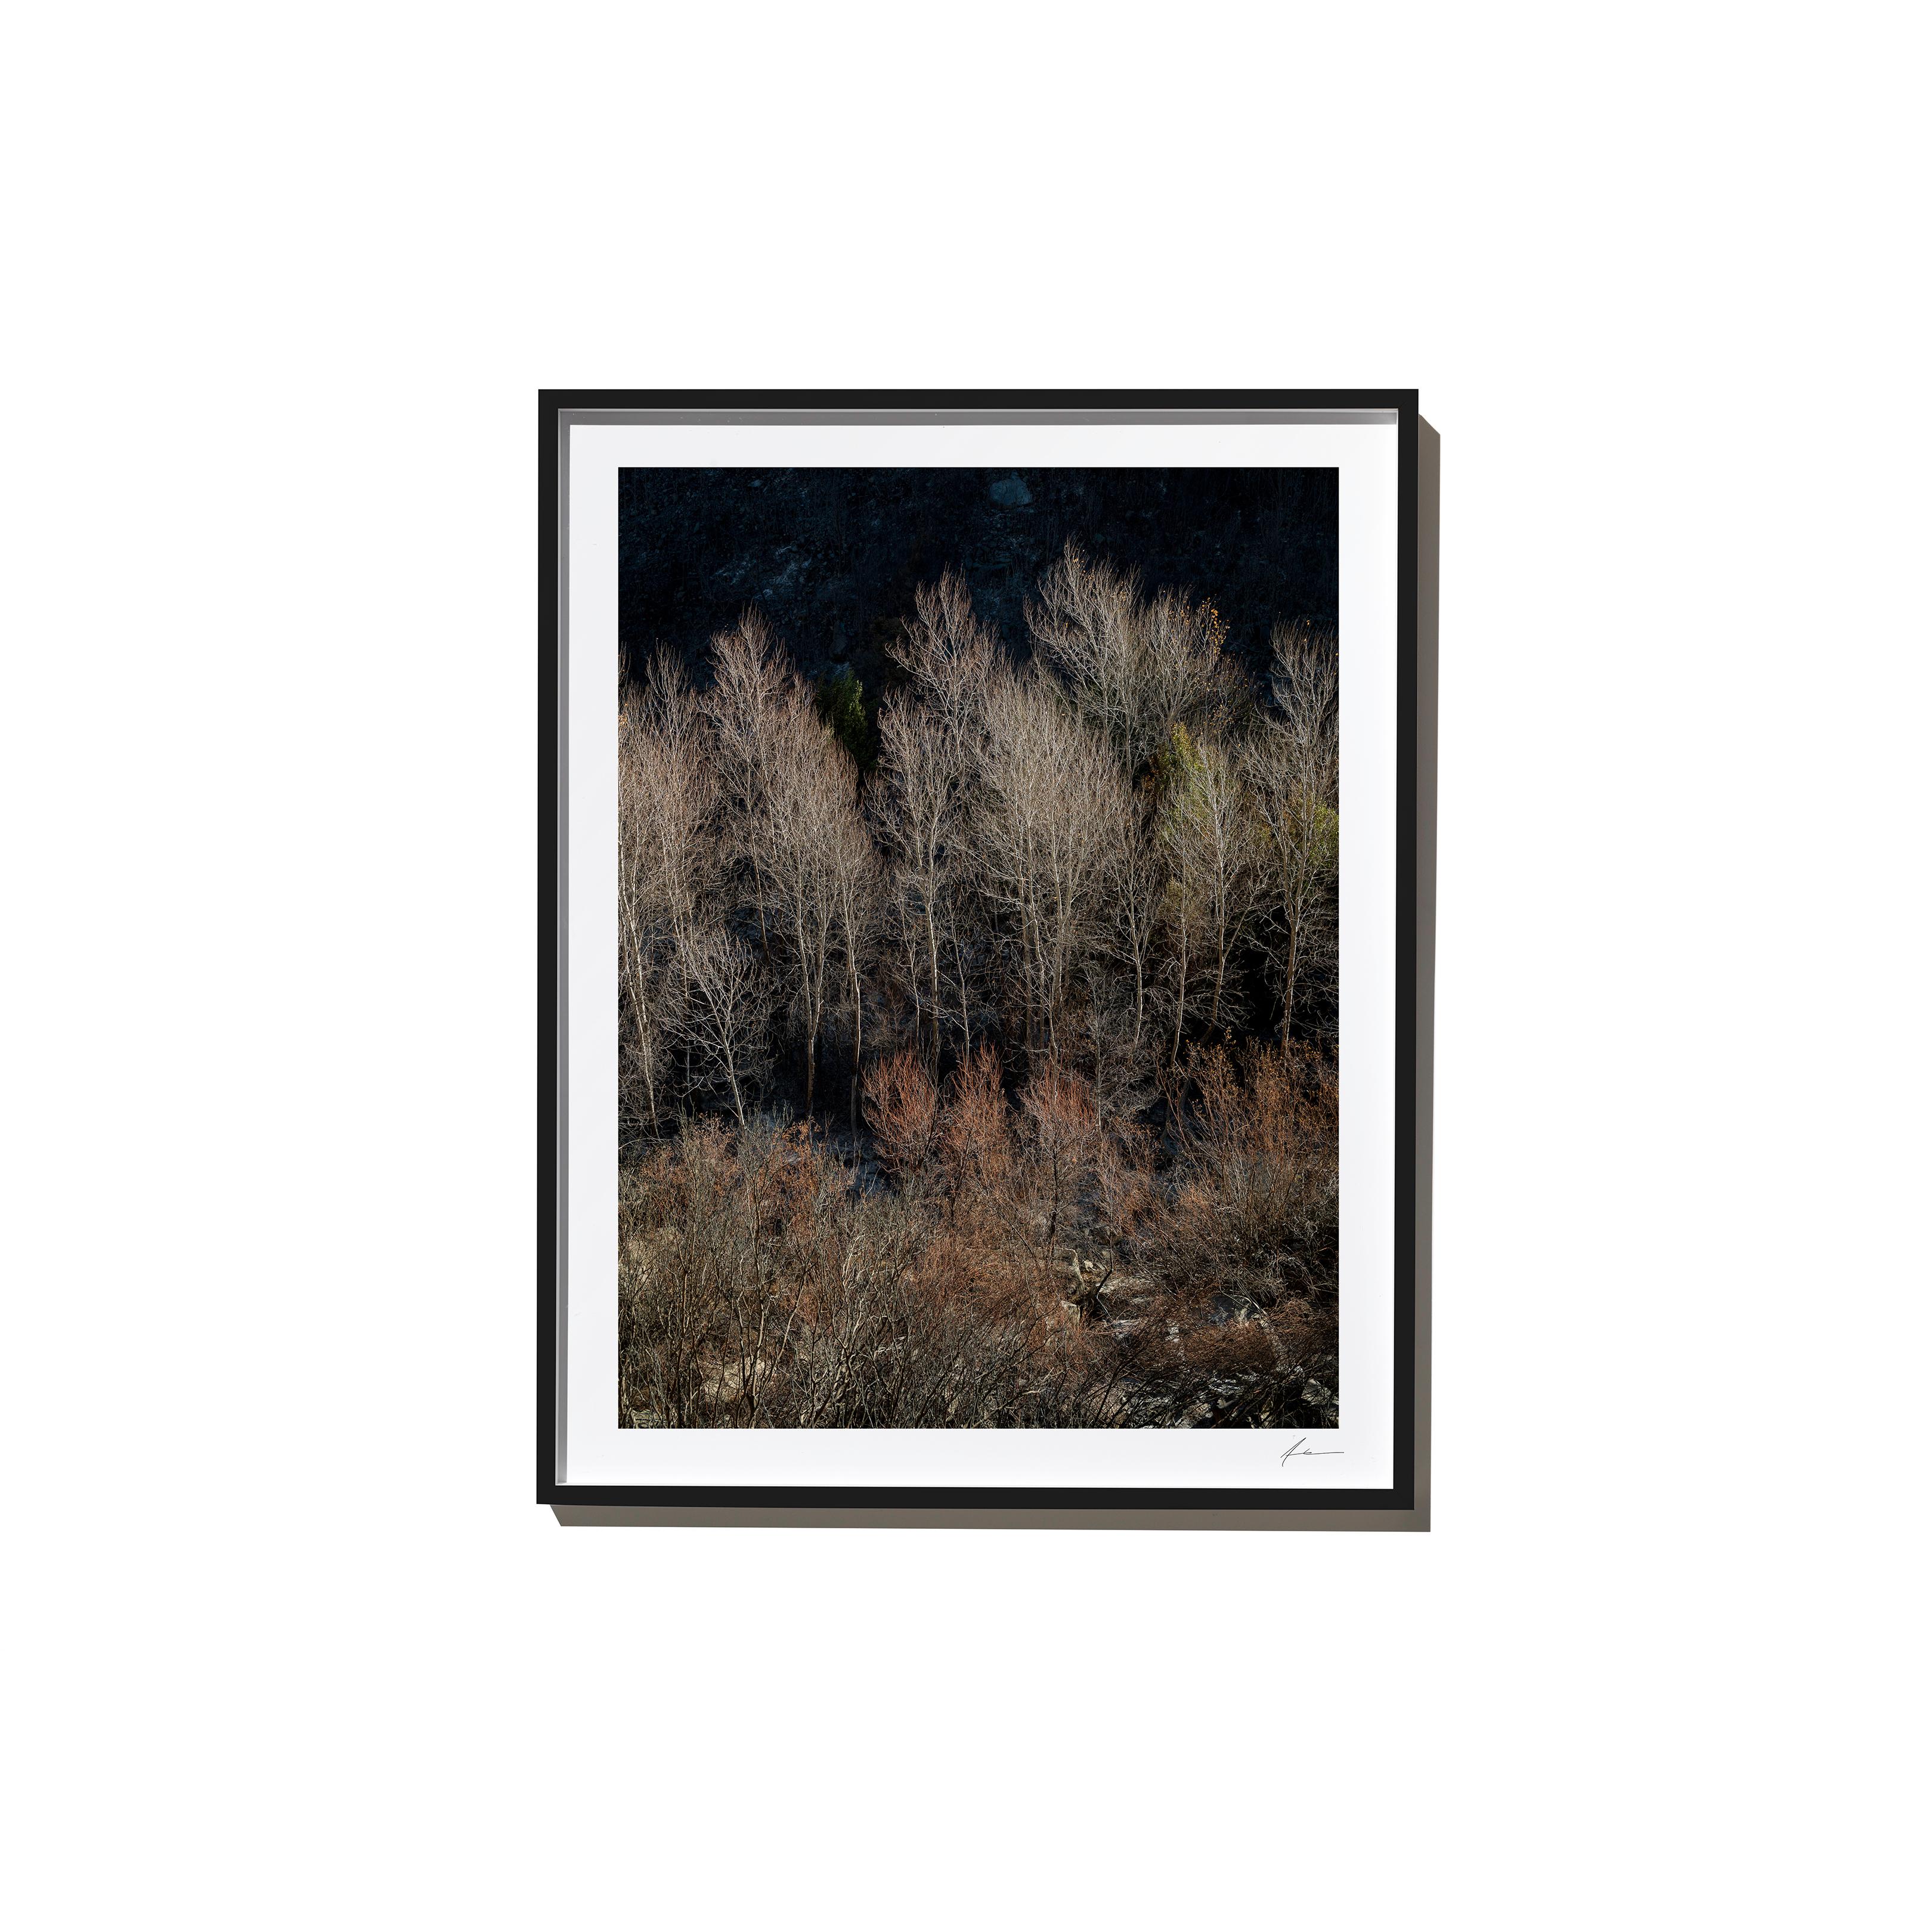 Forward, 2017, from the Survivors series (Framed Color Landscape Photography) - Print by Timothy Hogan